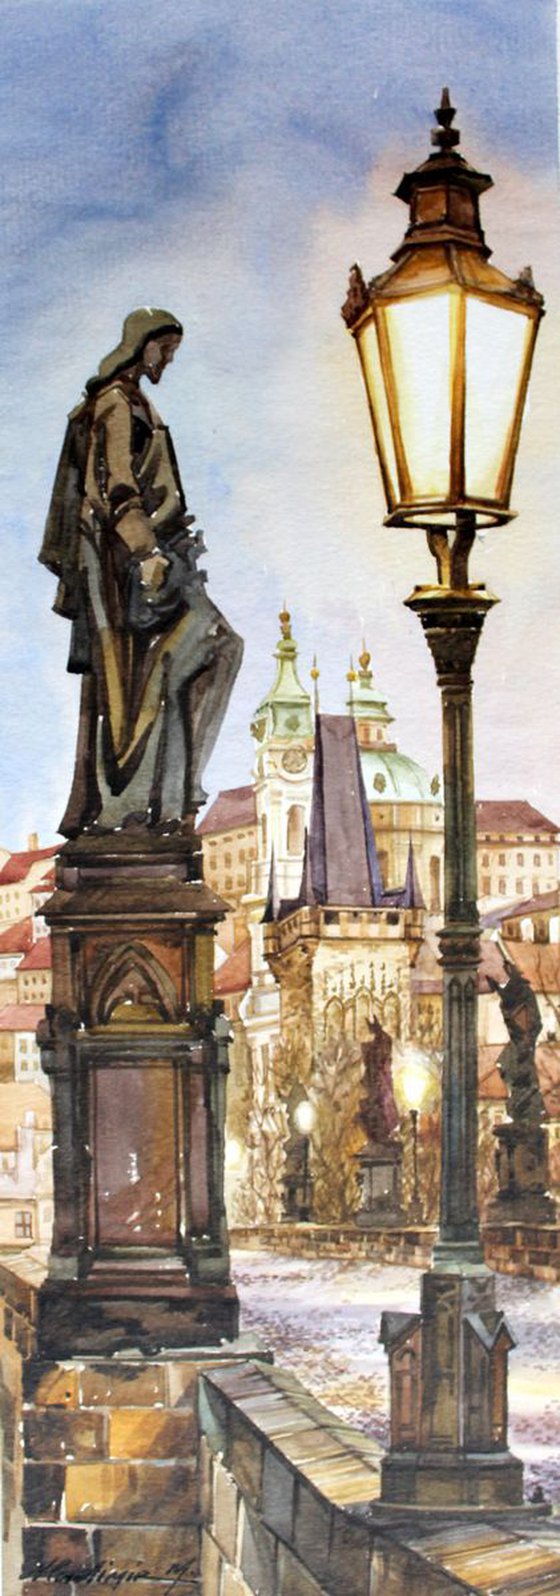 The Old Town of Prague 2